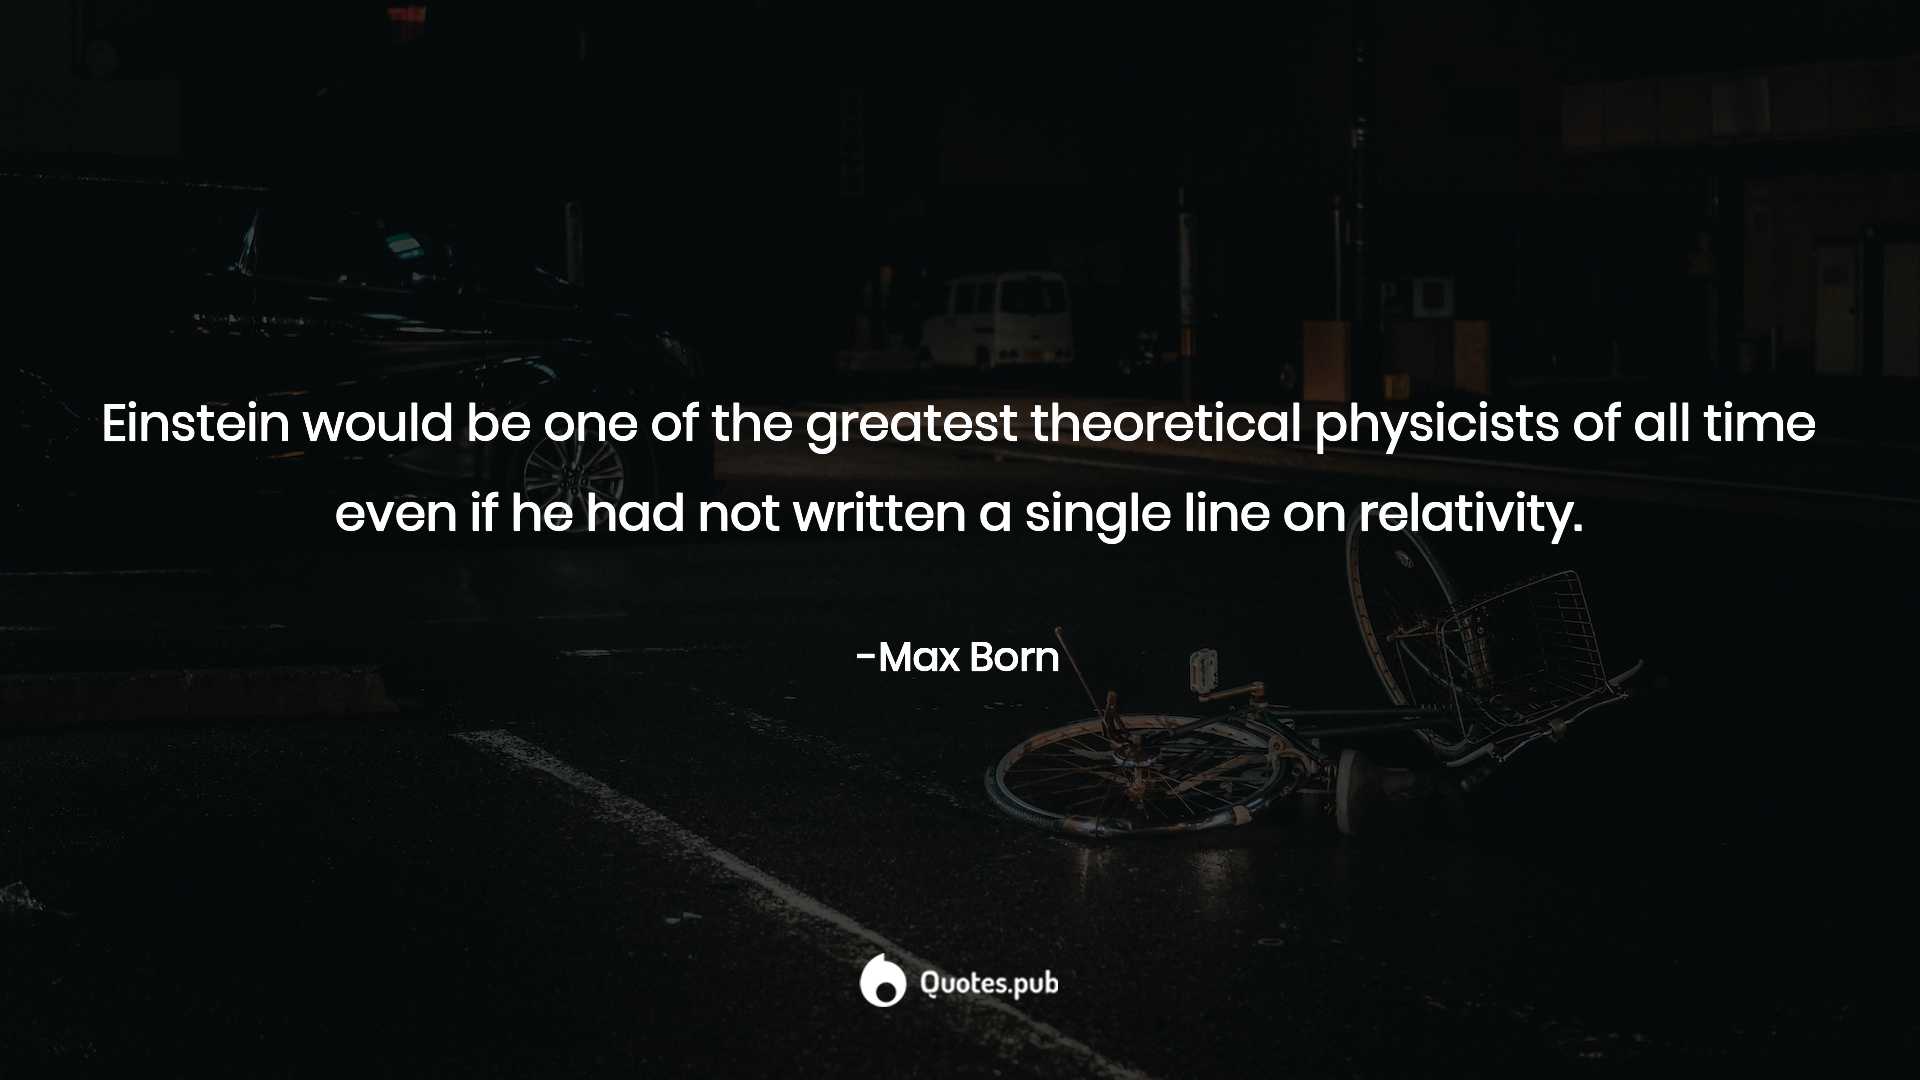 Max born on beliefs atoms and physics